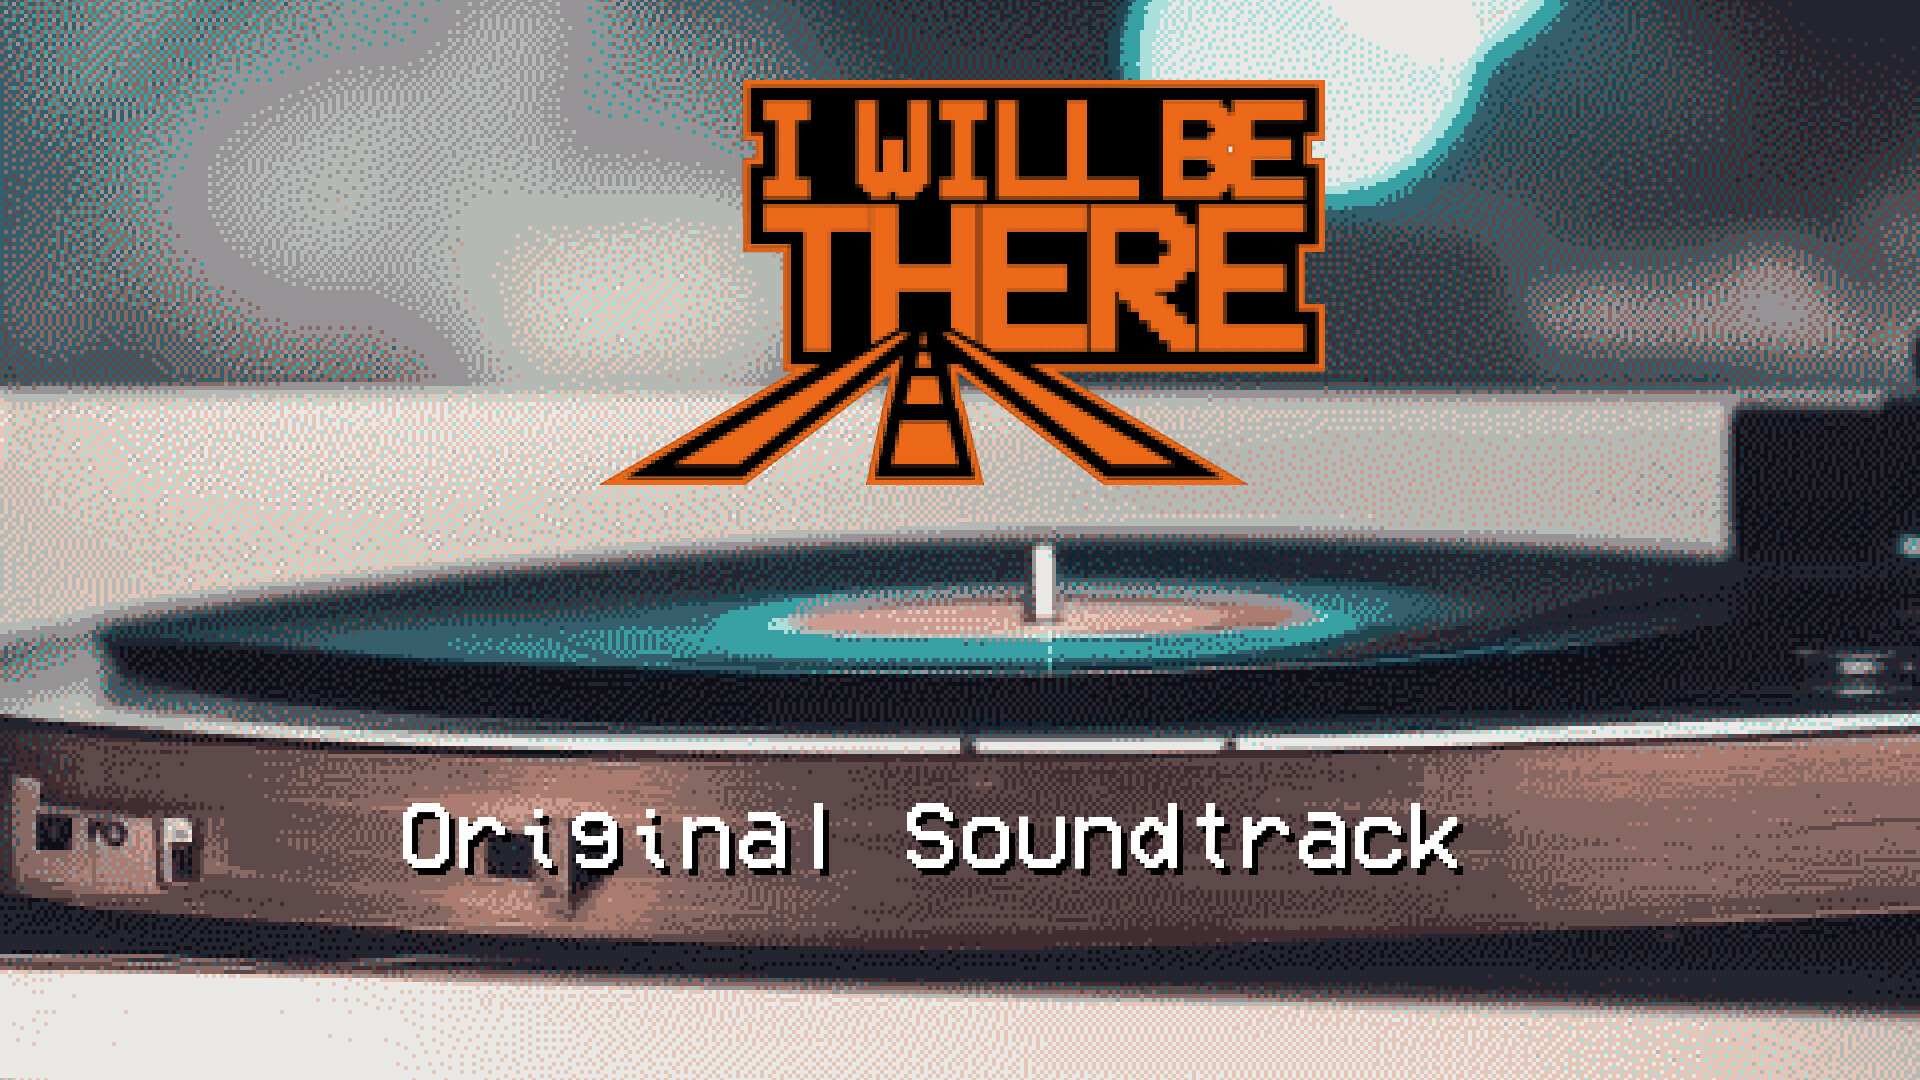 I Will Be There - Original Soundtrack Featured Screenshot #1